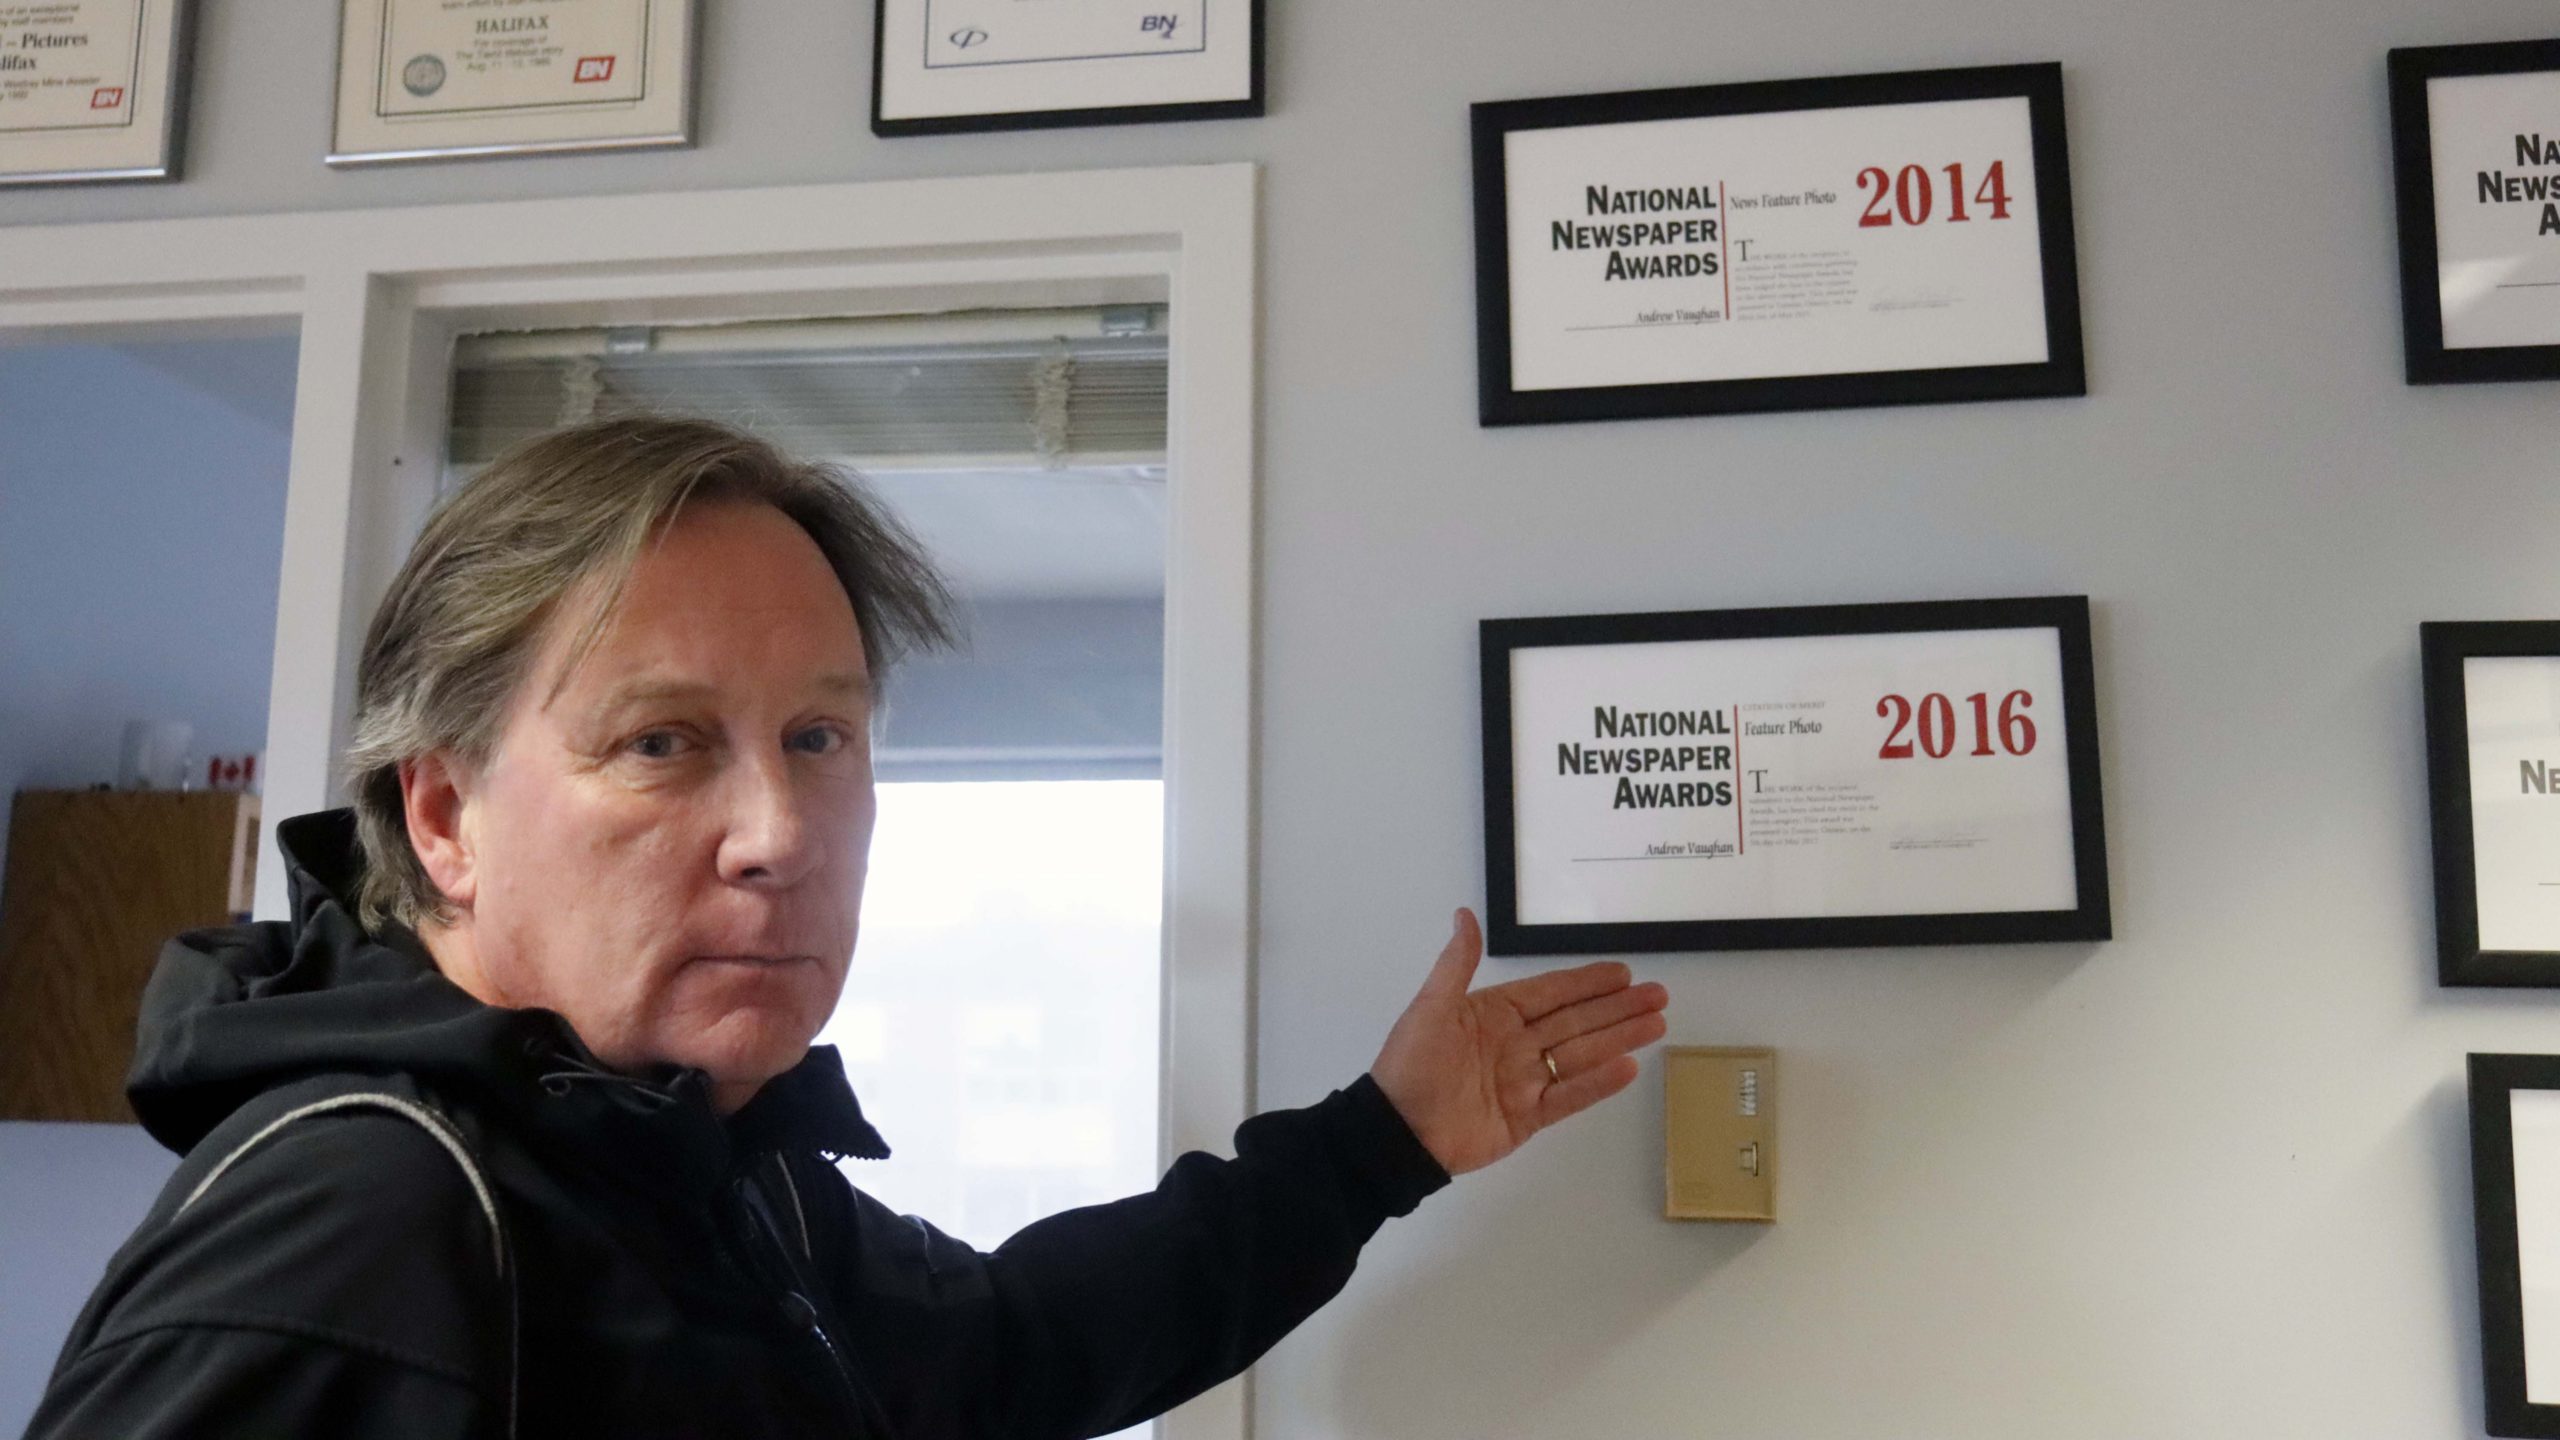 Andrew Vaughan has his hand up next to a plaque with the 2016 nomination for a National Newspaper Award, looking back to the camera.